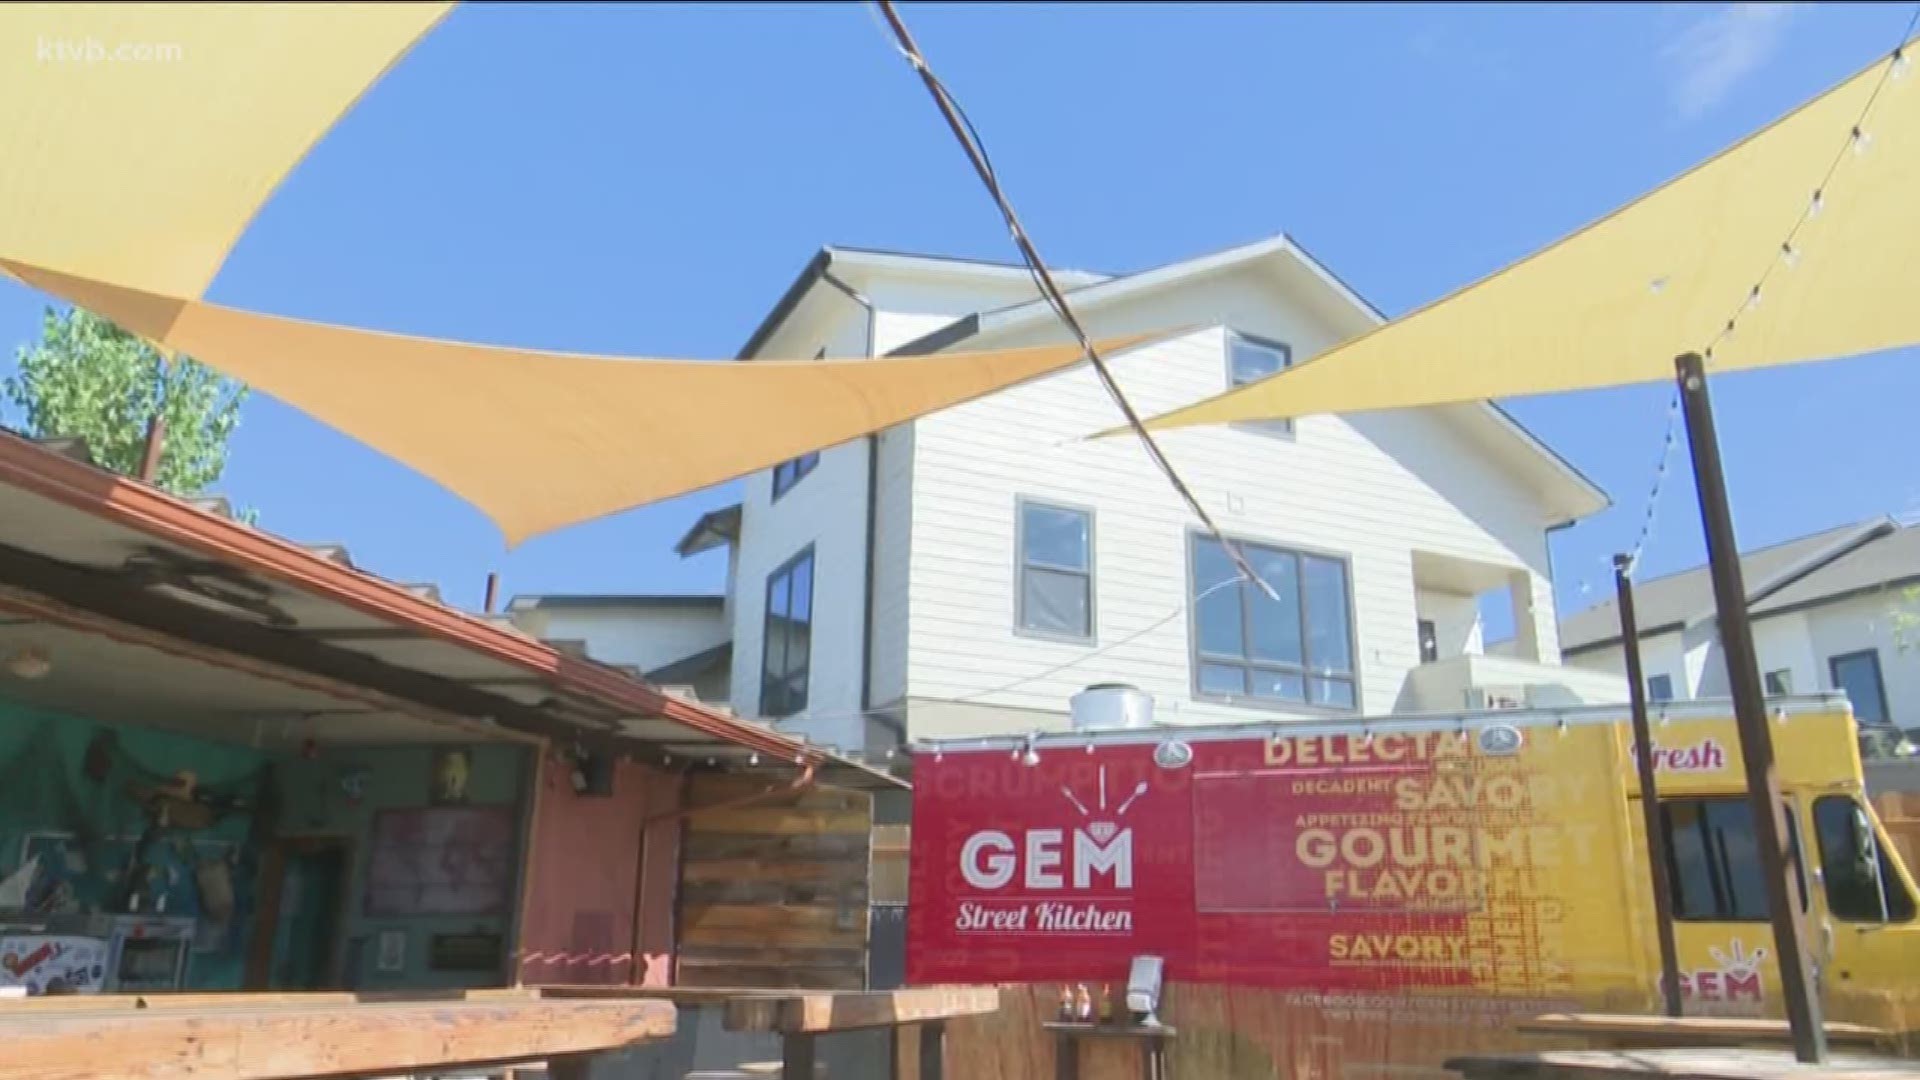 The owner of The Yardarm says the neighboring development was built wrong.